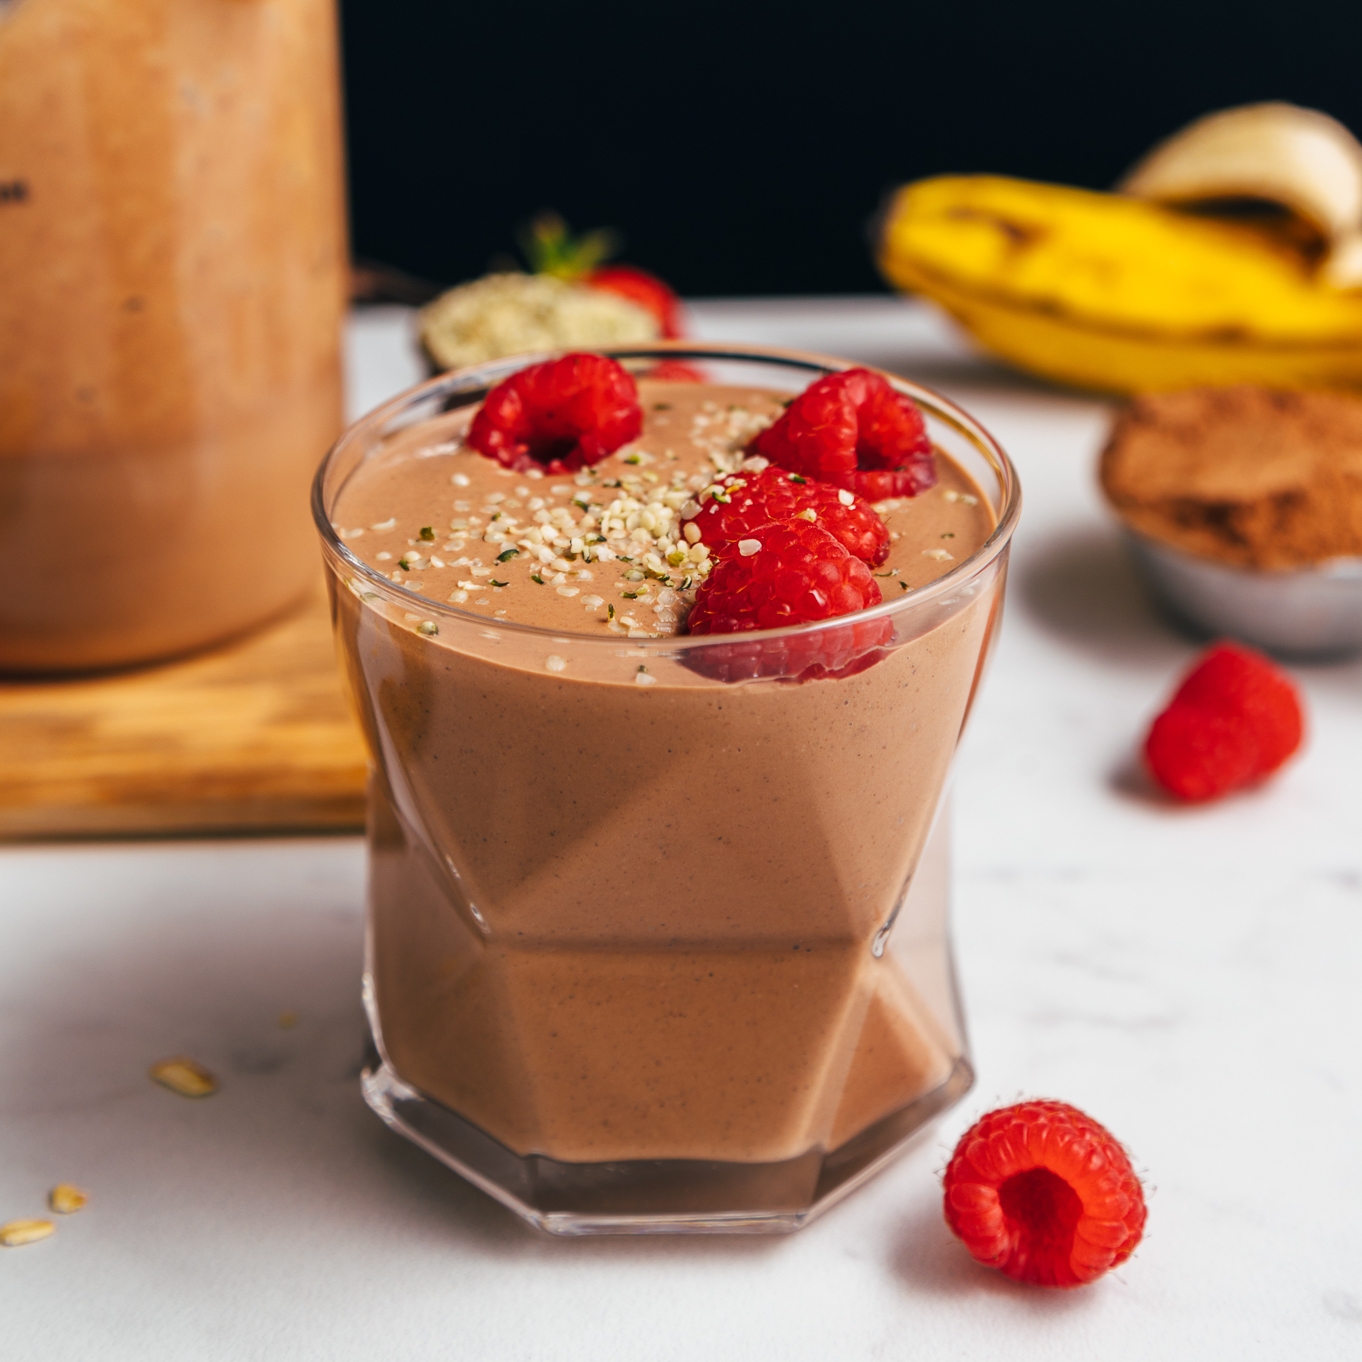 Glass of our plant-based Chocolate Protein Shake topped with fresh raspberries and hemp seeds